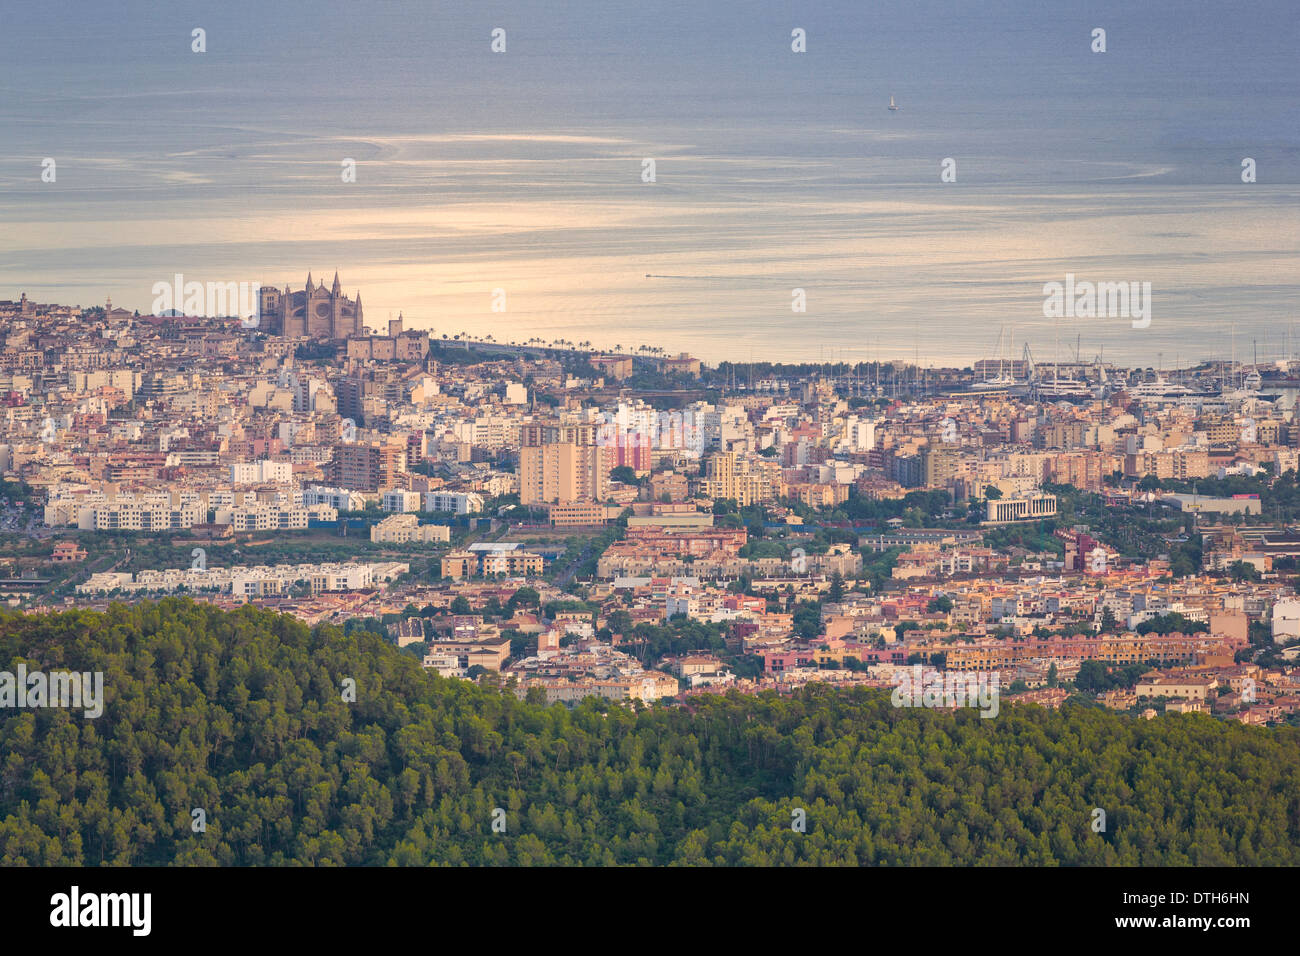 Partial view of Palma de Majorca town and harbour at sunset from a long distance. Majorca, Balearic islands, Spain Stock Photo